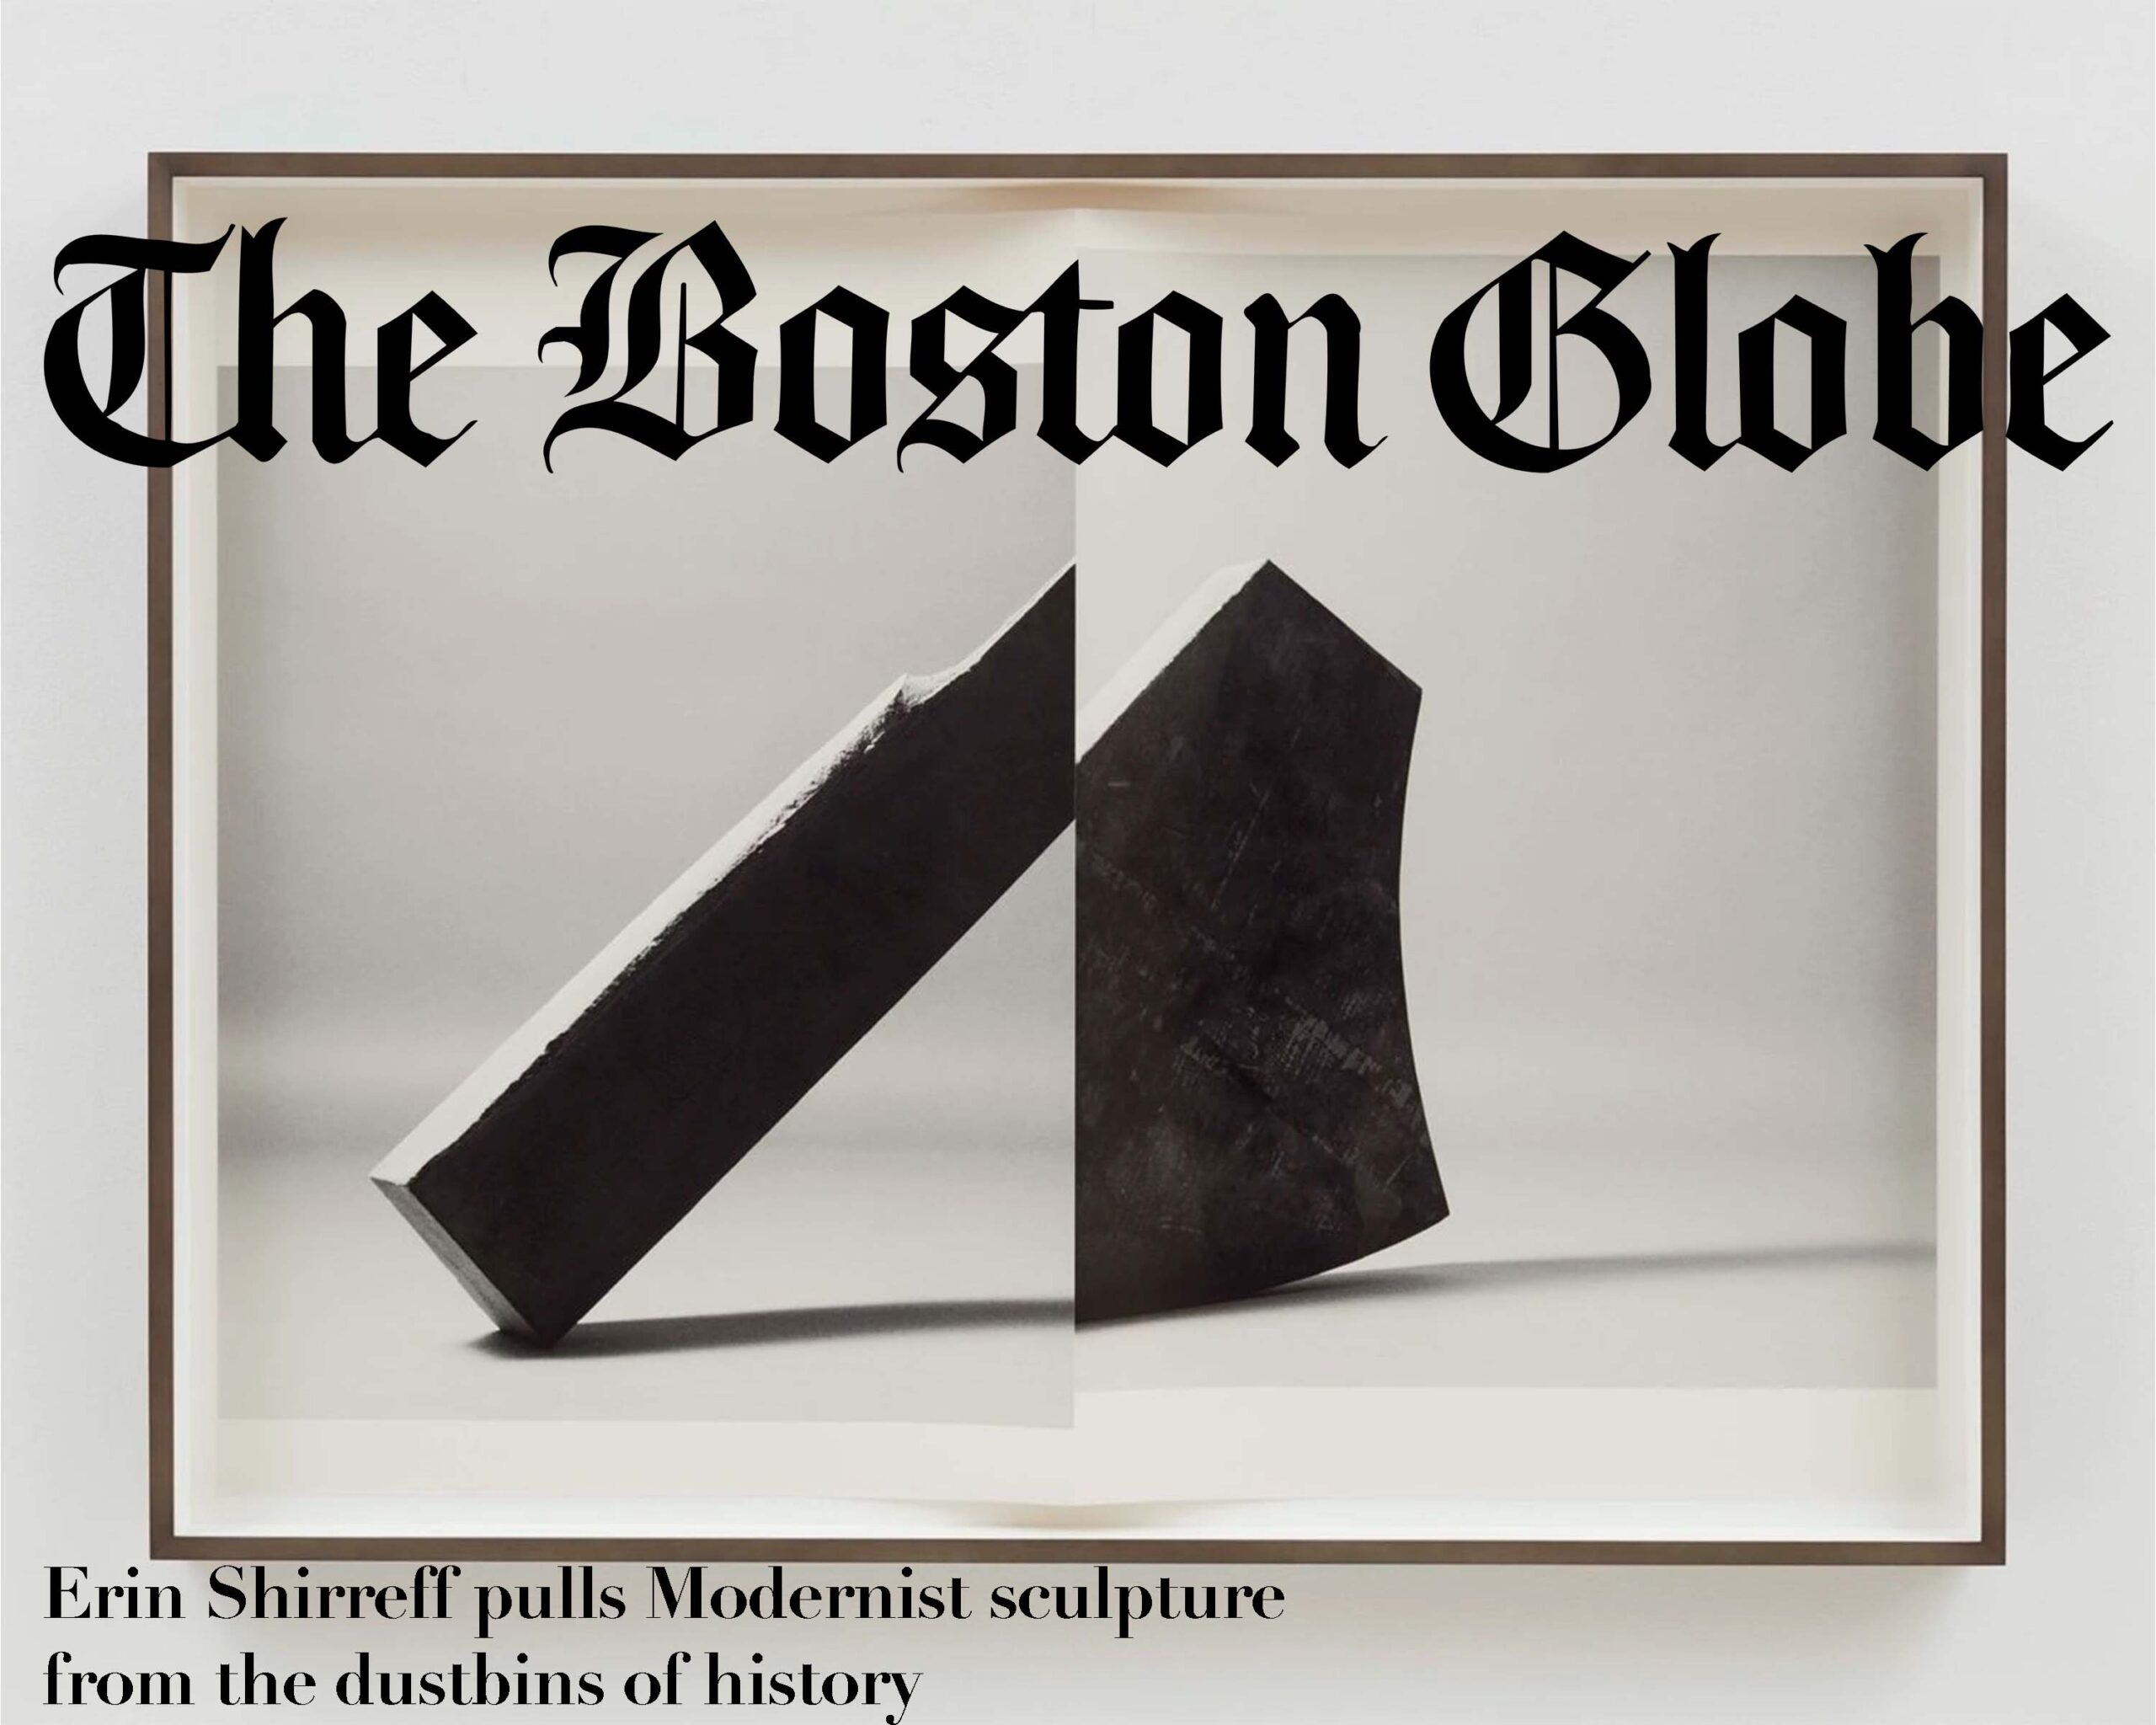 The Boston Globe, 2021 | Erin Shirreff pulls Modernist sculpture from the dustbins of history